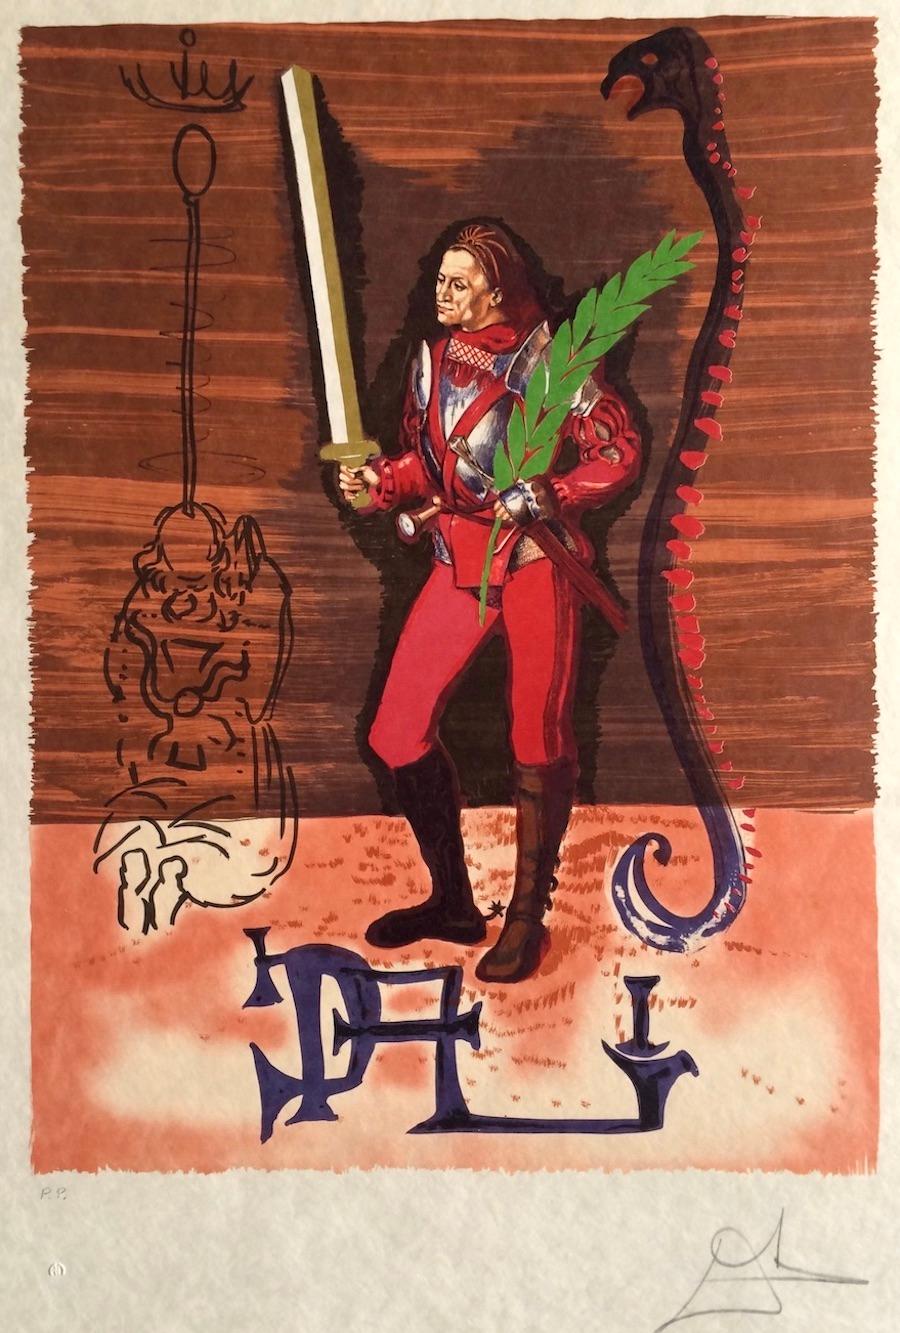 COLUMBUS DISCOVERS AMERICA(Jack of Swords) Signed Lithograph on Japon Paper, Red - Print by Salvador Dalí